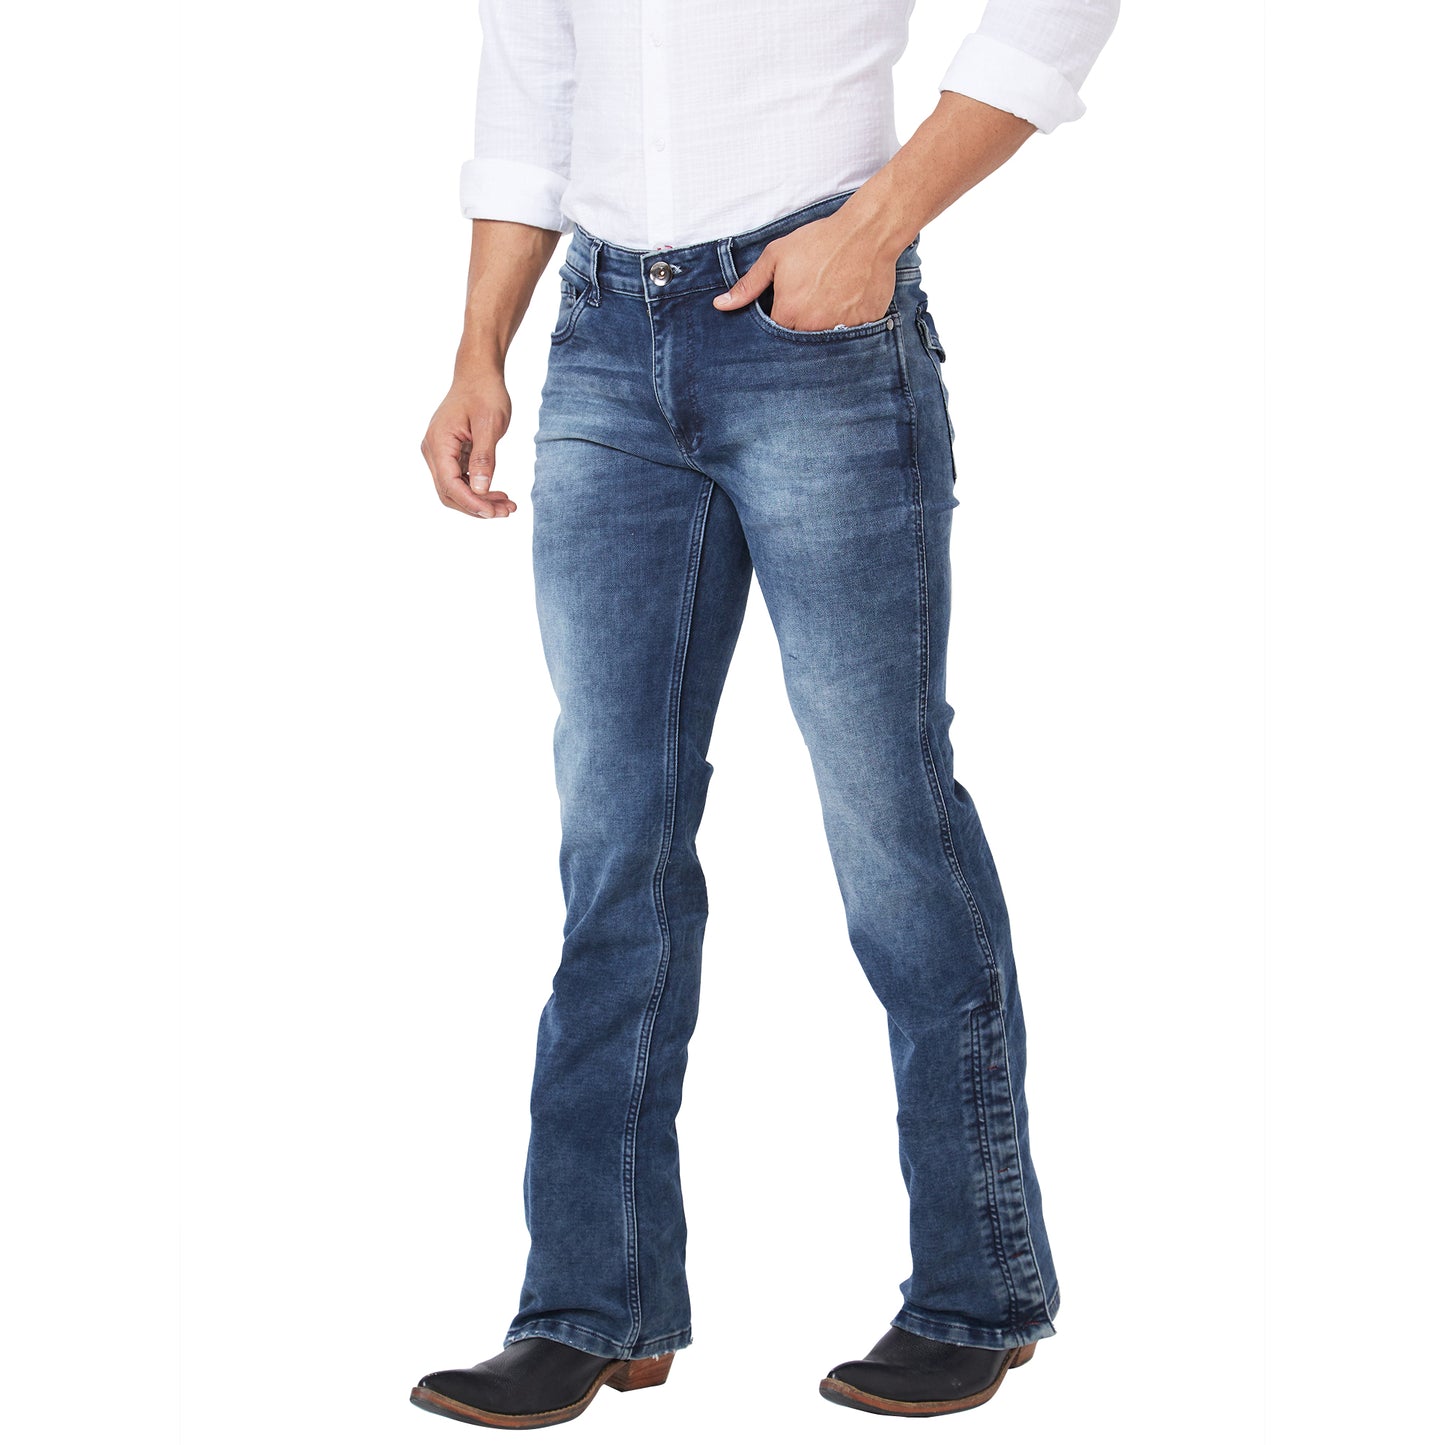 Men's Casual Slim Fit Straight Denim Boot-cut Jeans Stretchable